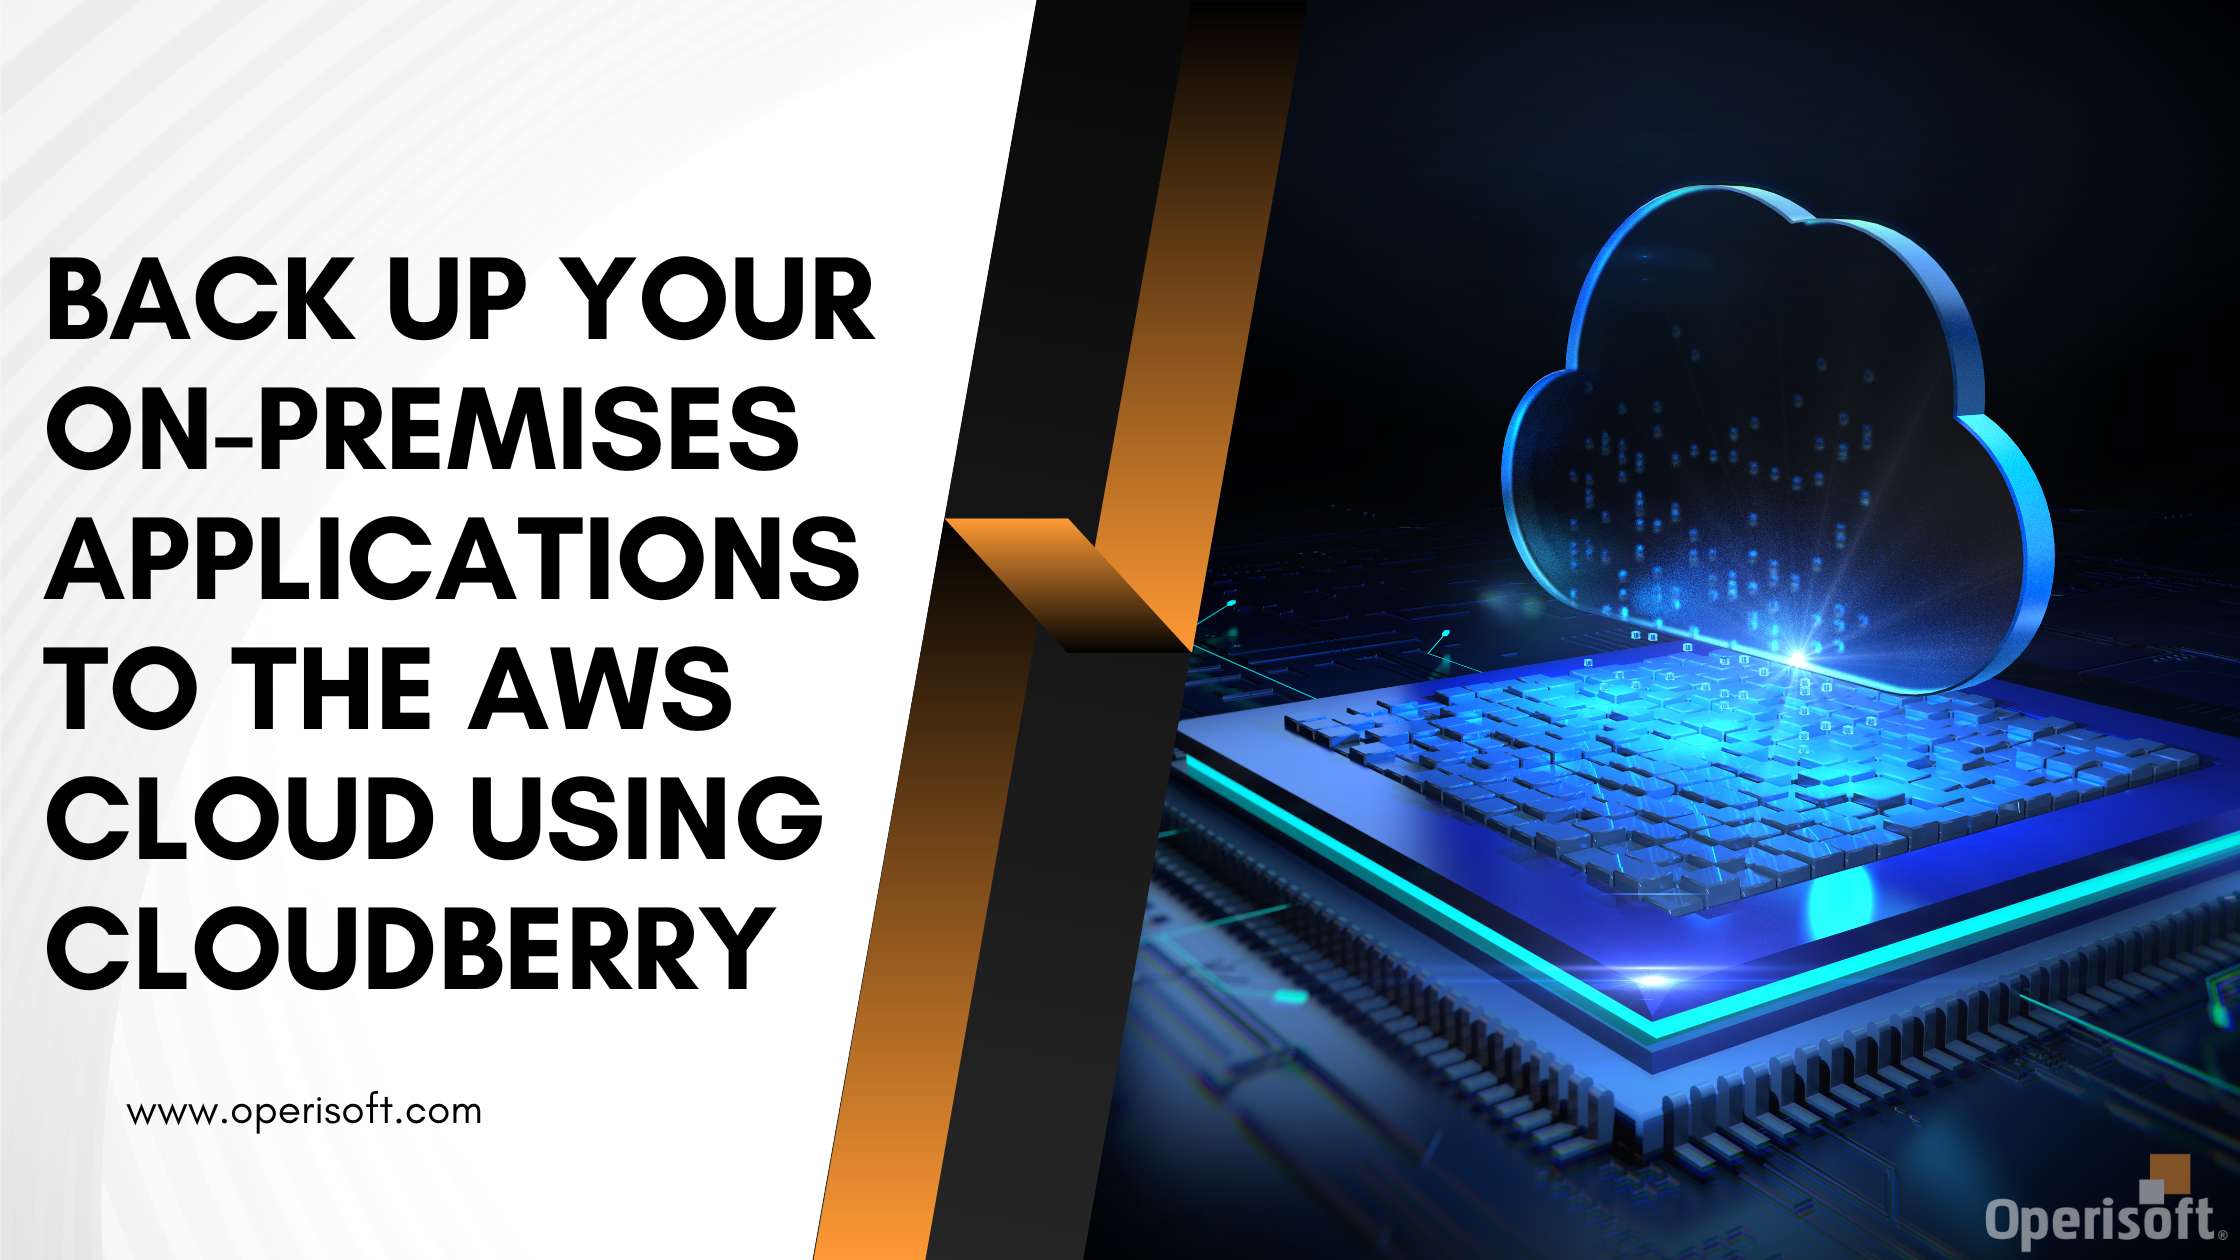 Back up your on-premises applications to the AWS cloud using Cloudberry